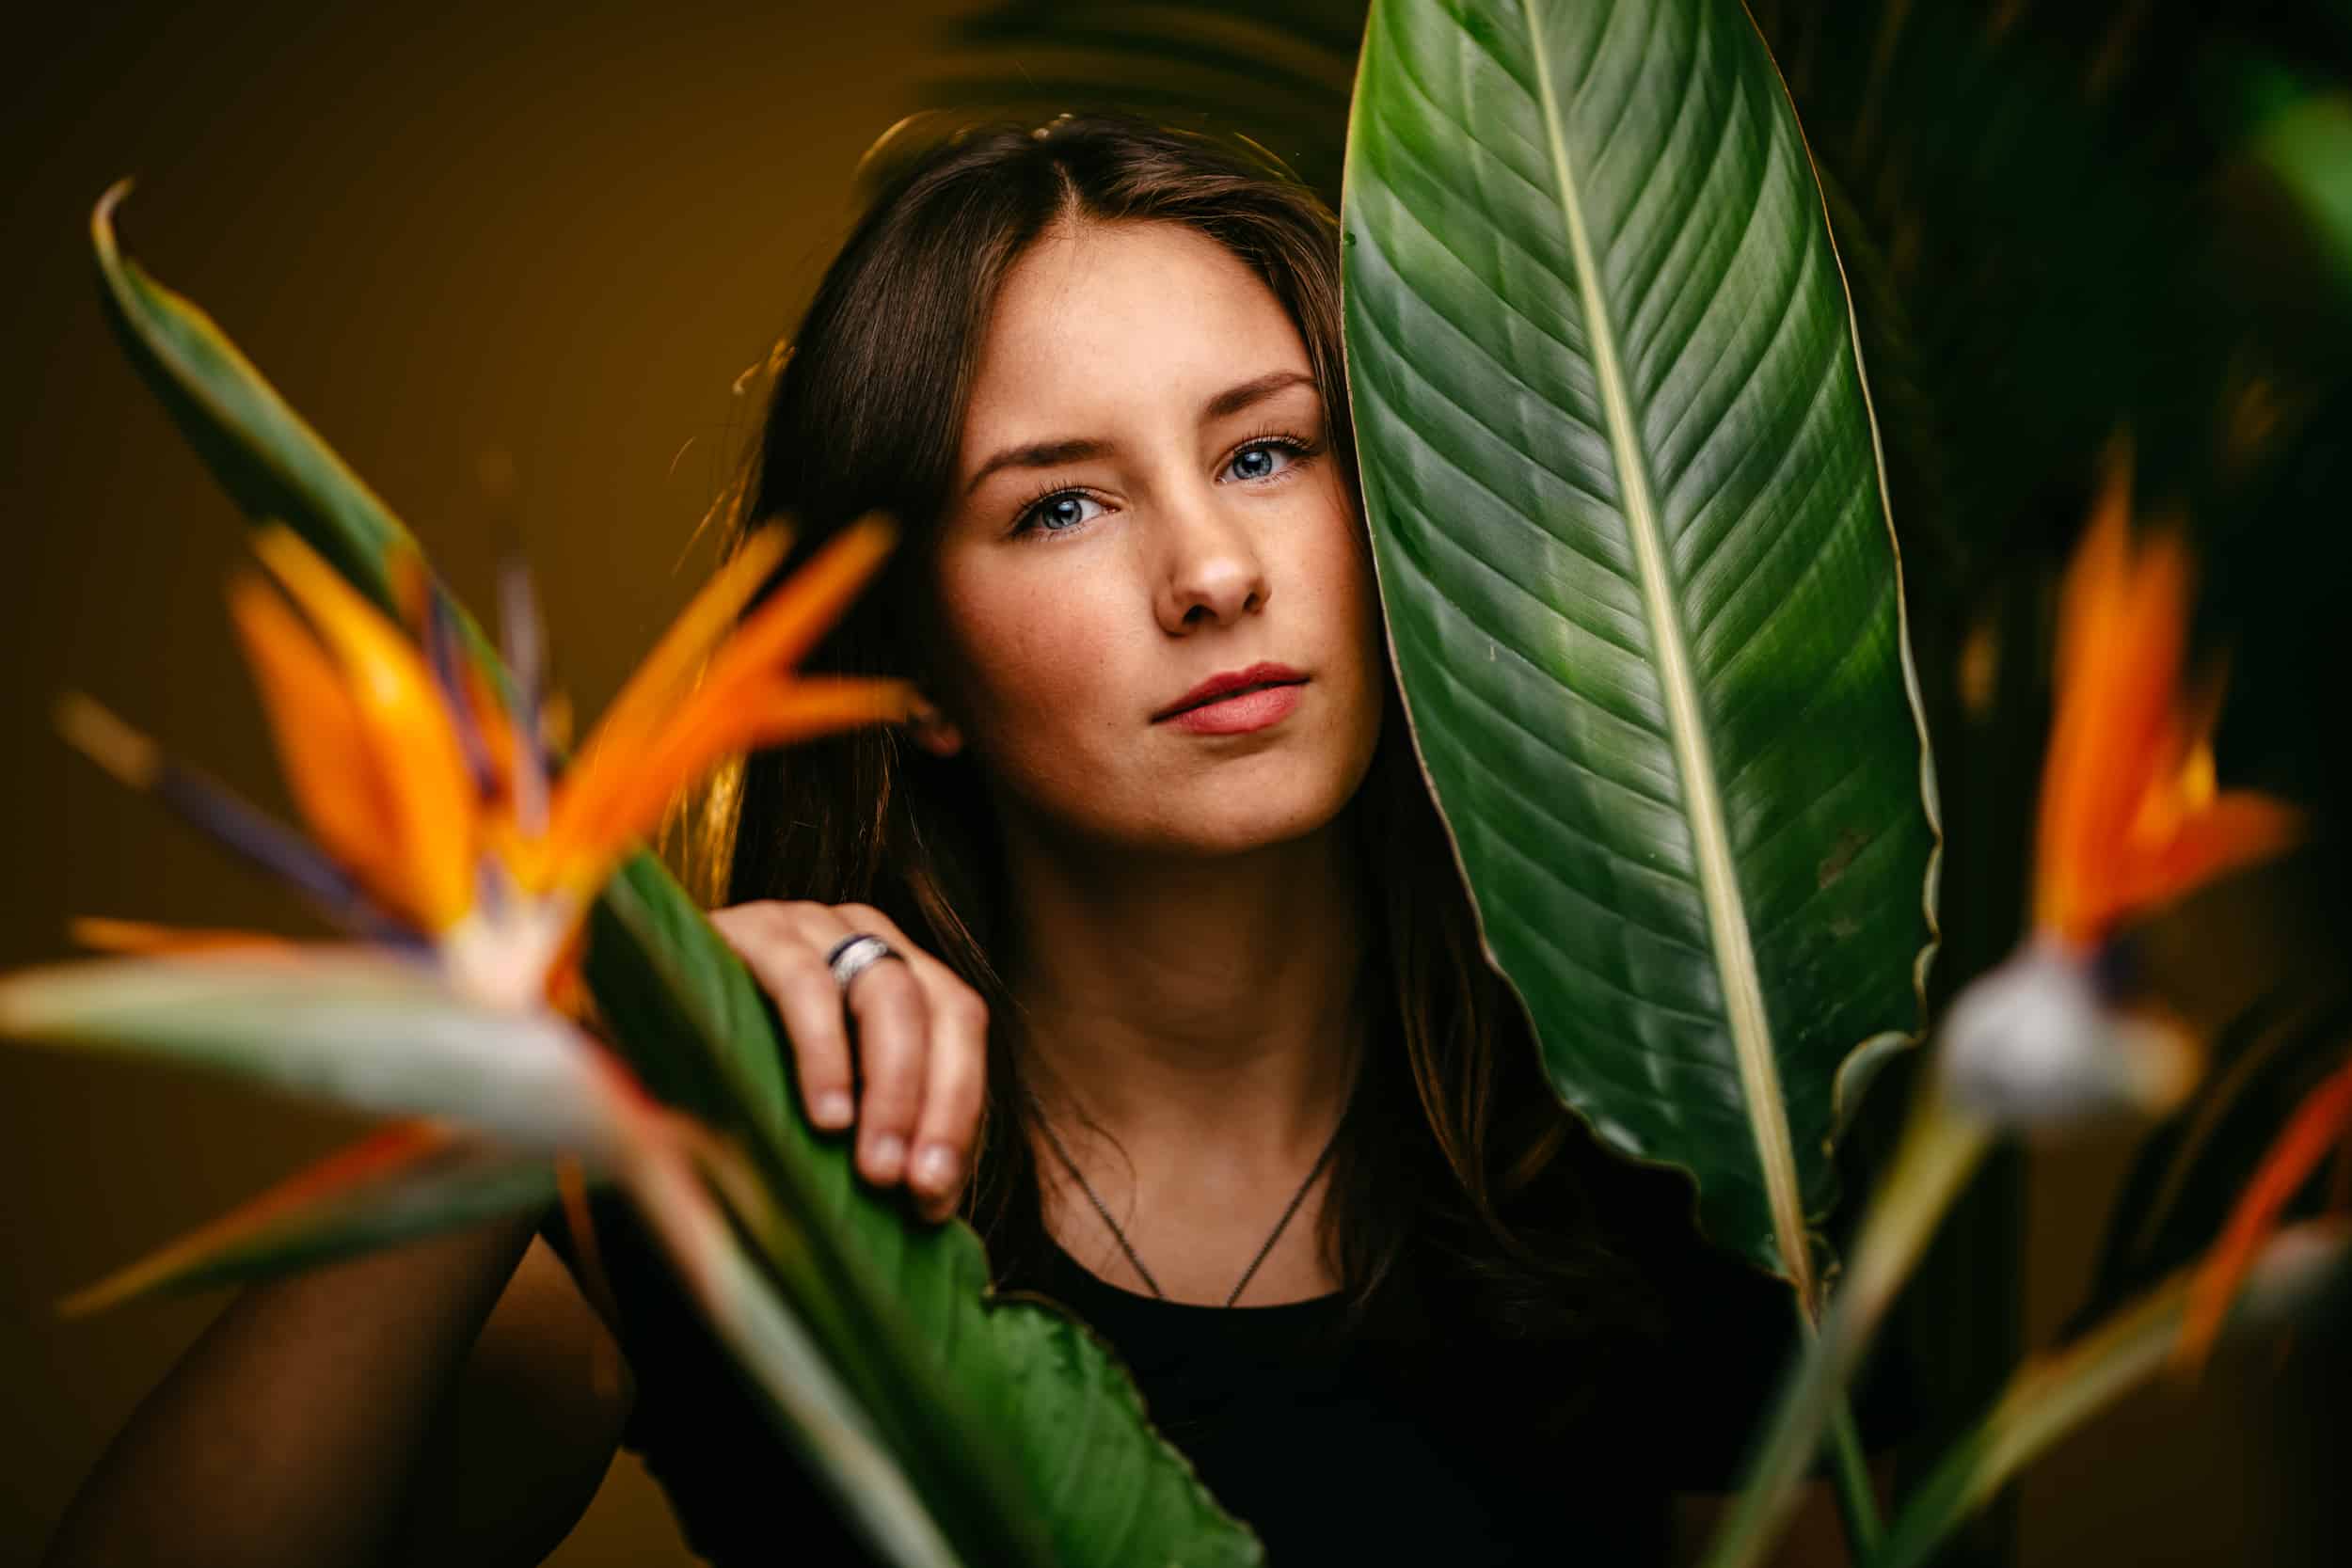 A professional portrait photographer captures a woman's pose in front of a bird of paradise plant.